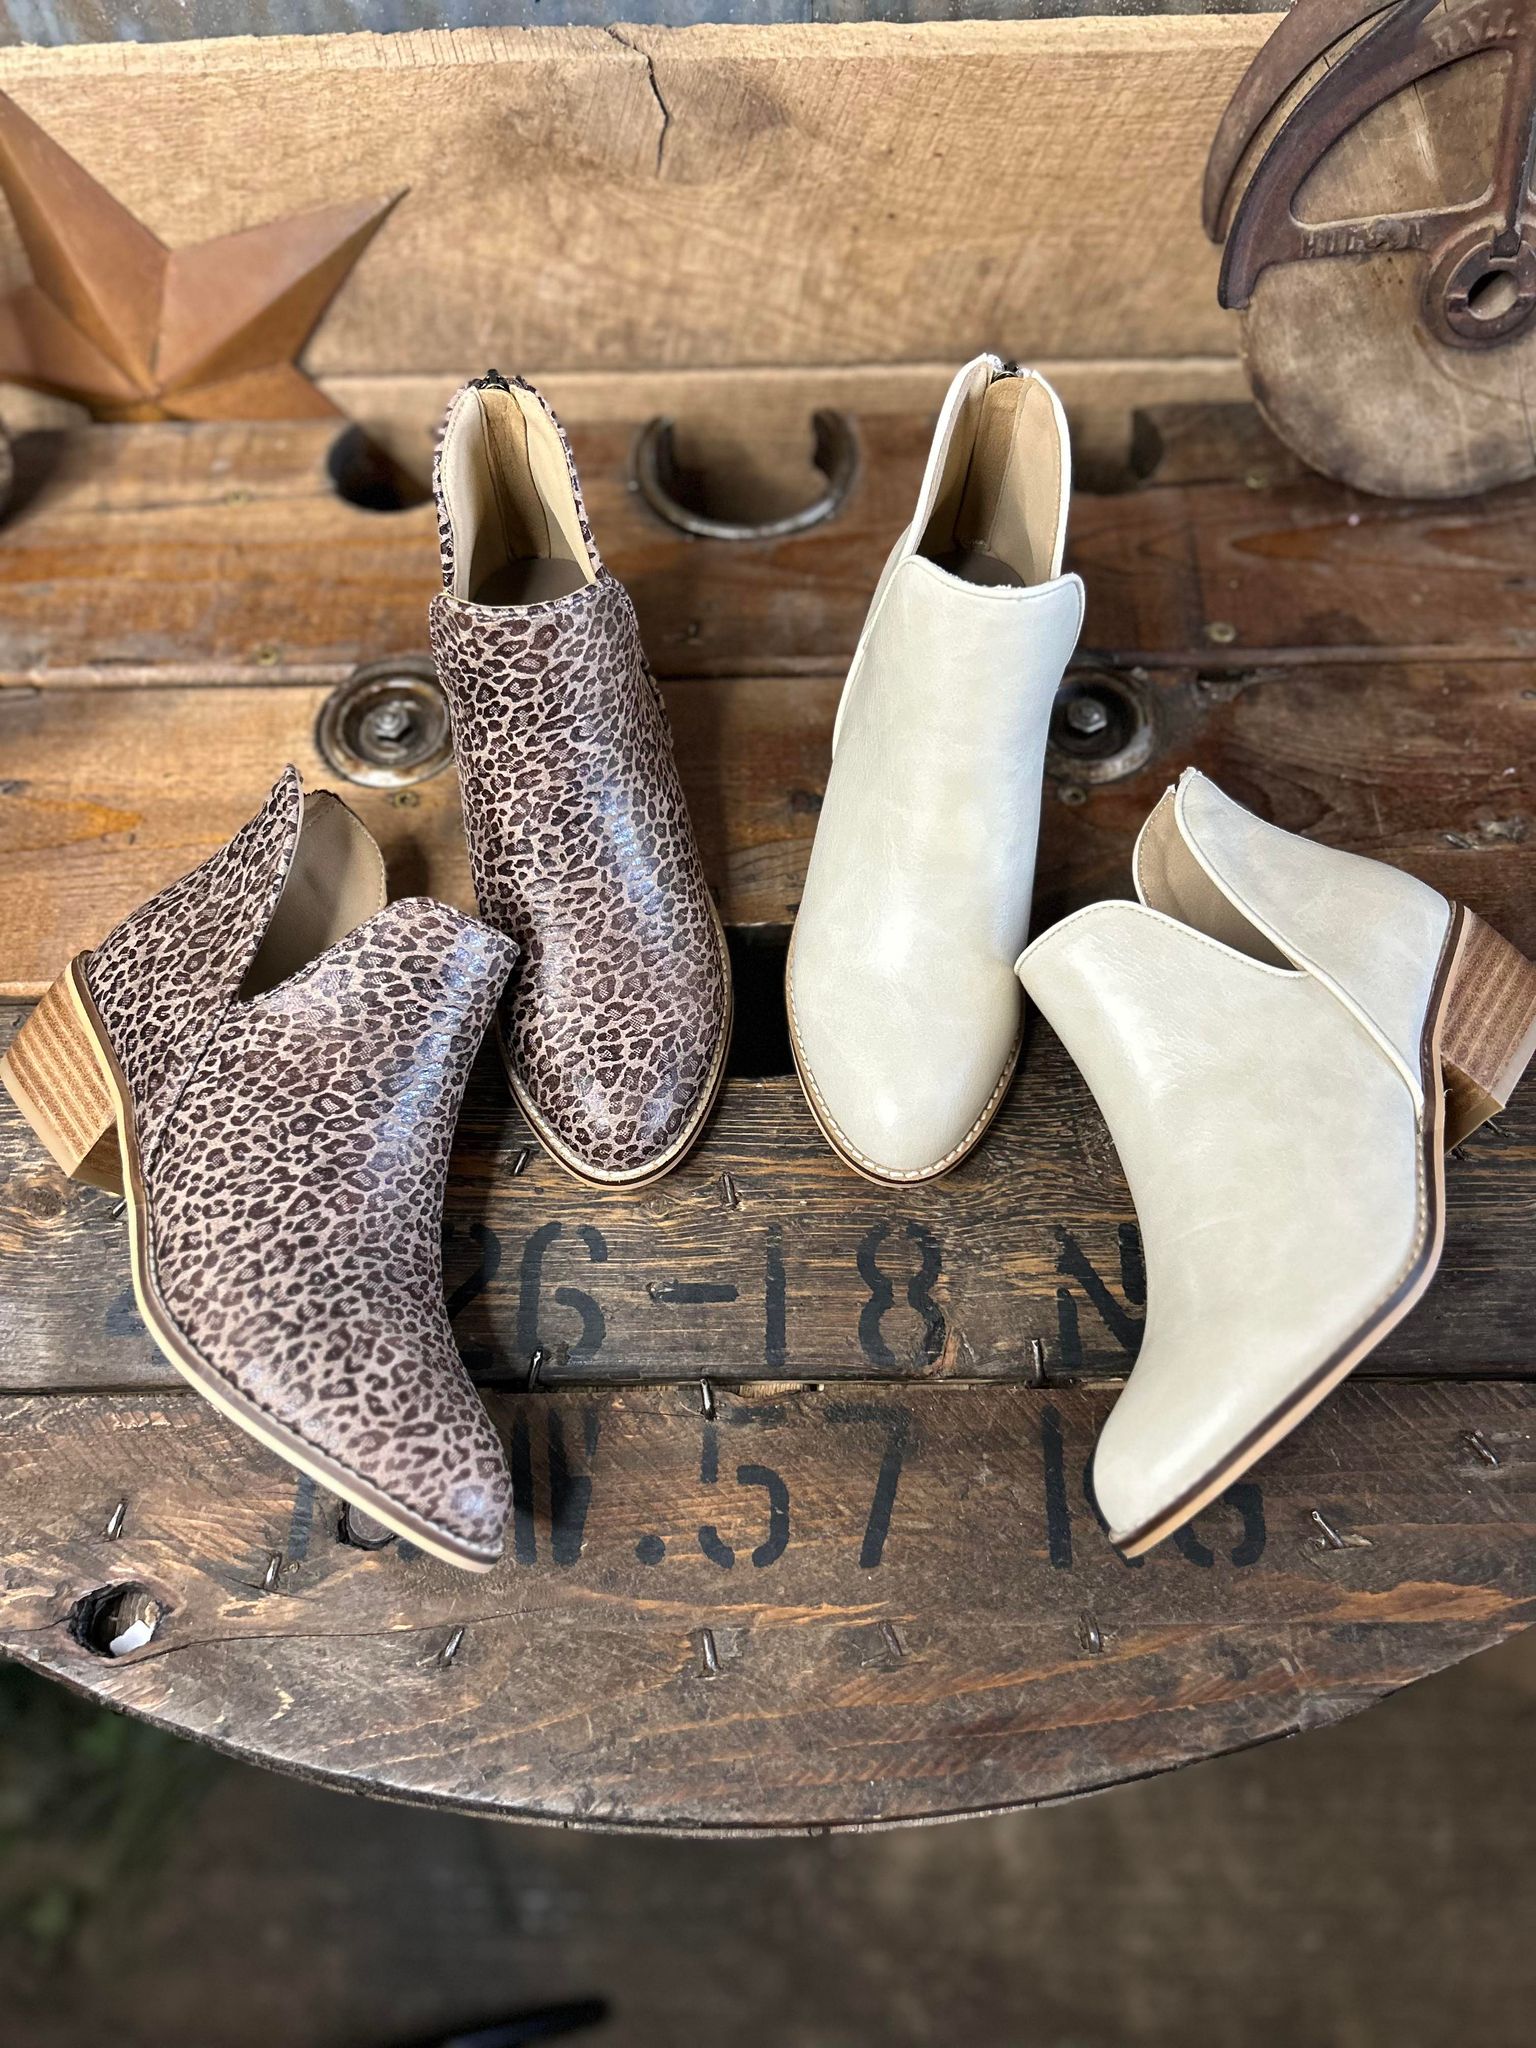 Boutique Vanish Bootie in Ivory *FINAL SALE*-Women's Booties-Corkys Footwear-Lucky J Boots & More, Women's, Men's, & Kids Western Store Located in Carthage, MO